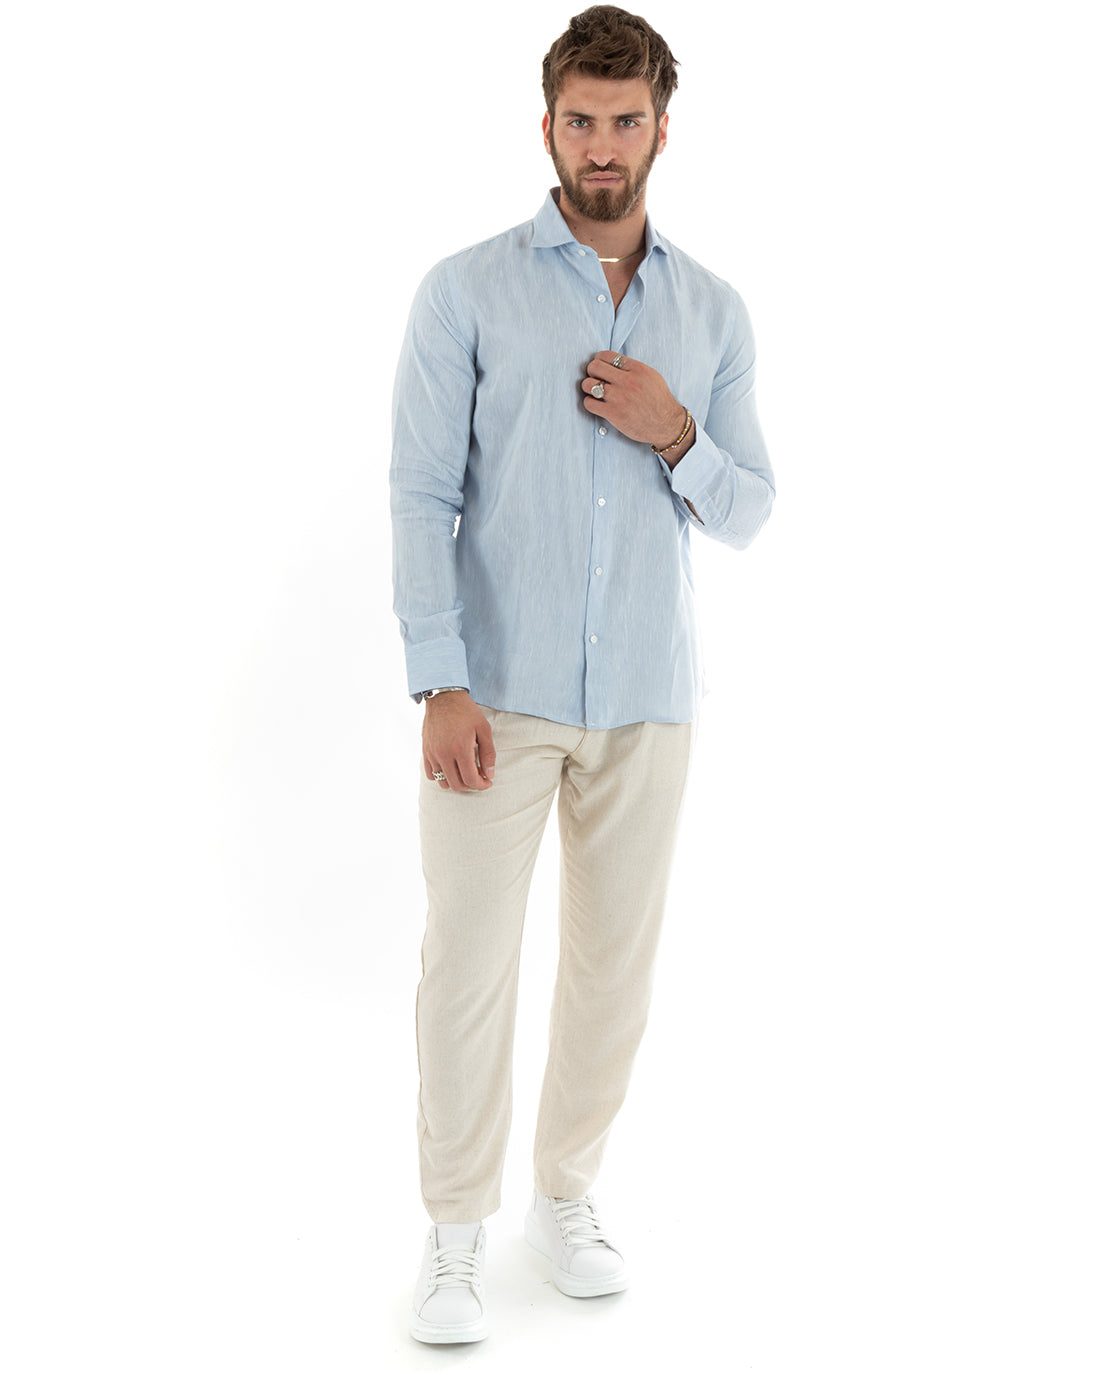 Men's Shirt With French Collar Long Sleeves Tailored Melange Linen Light Blue GIOSAL-C2686A